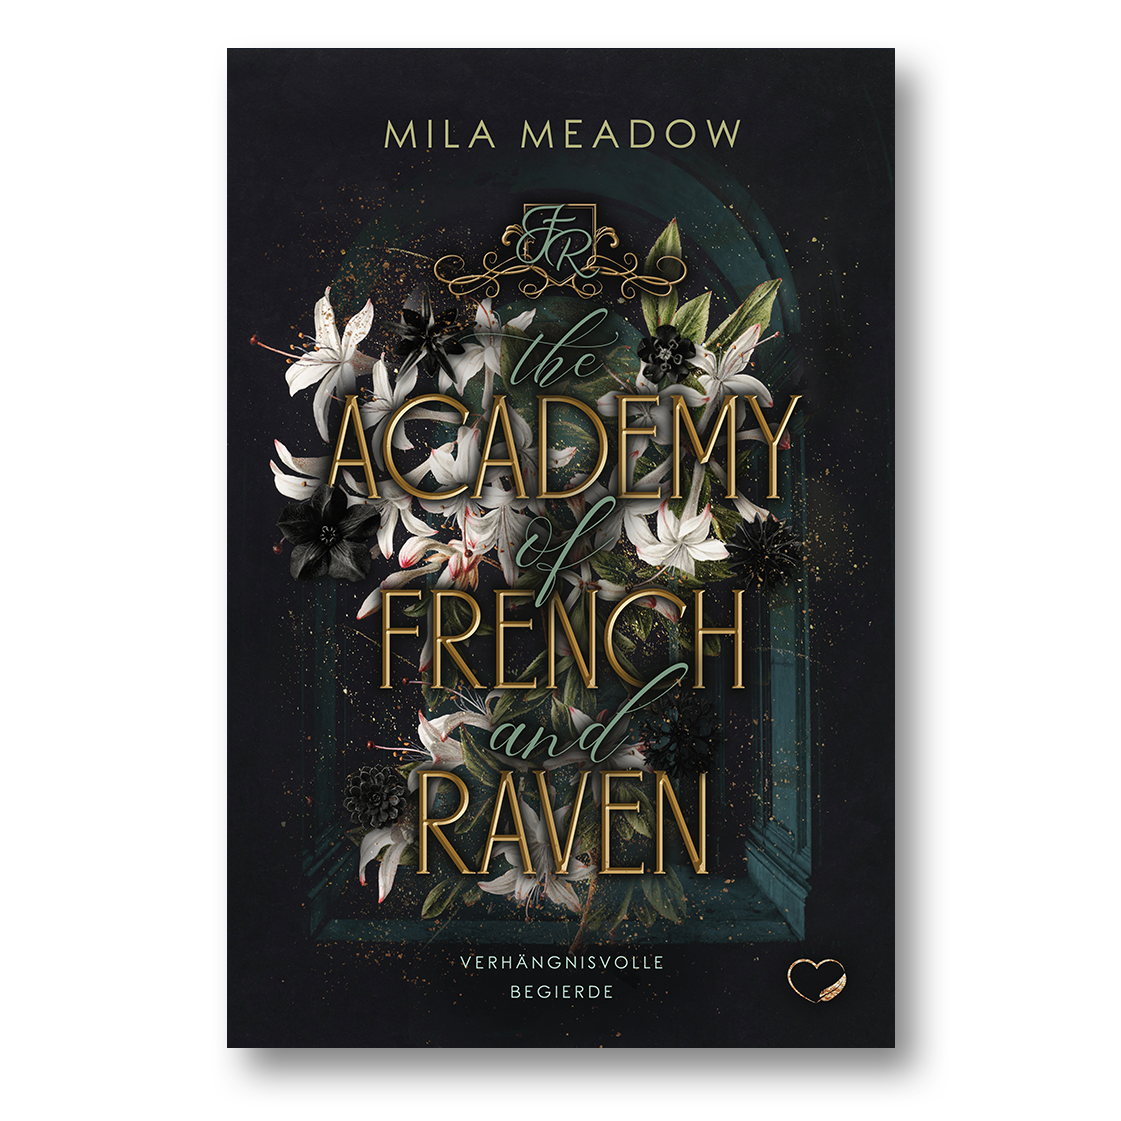     The Academy of French & Raven (Band 1)